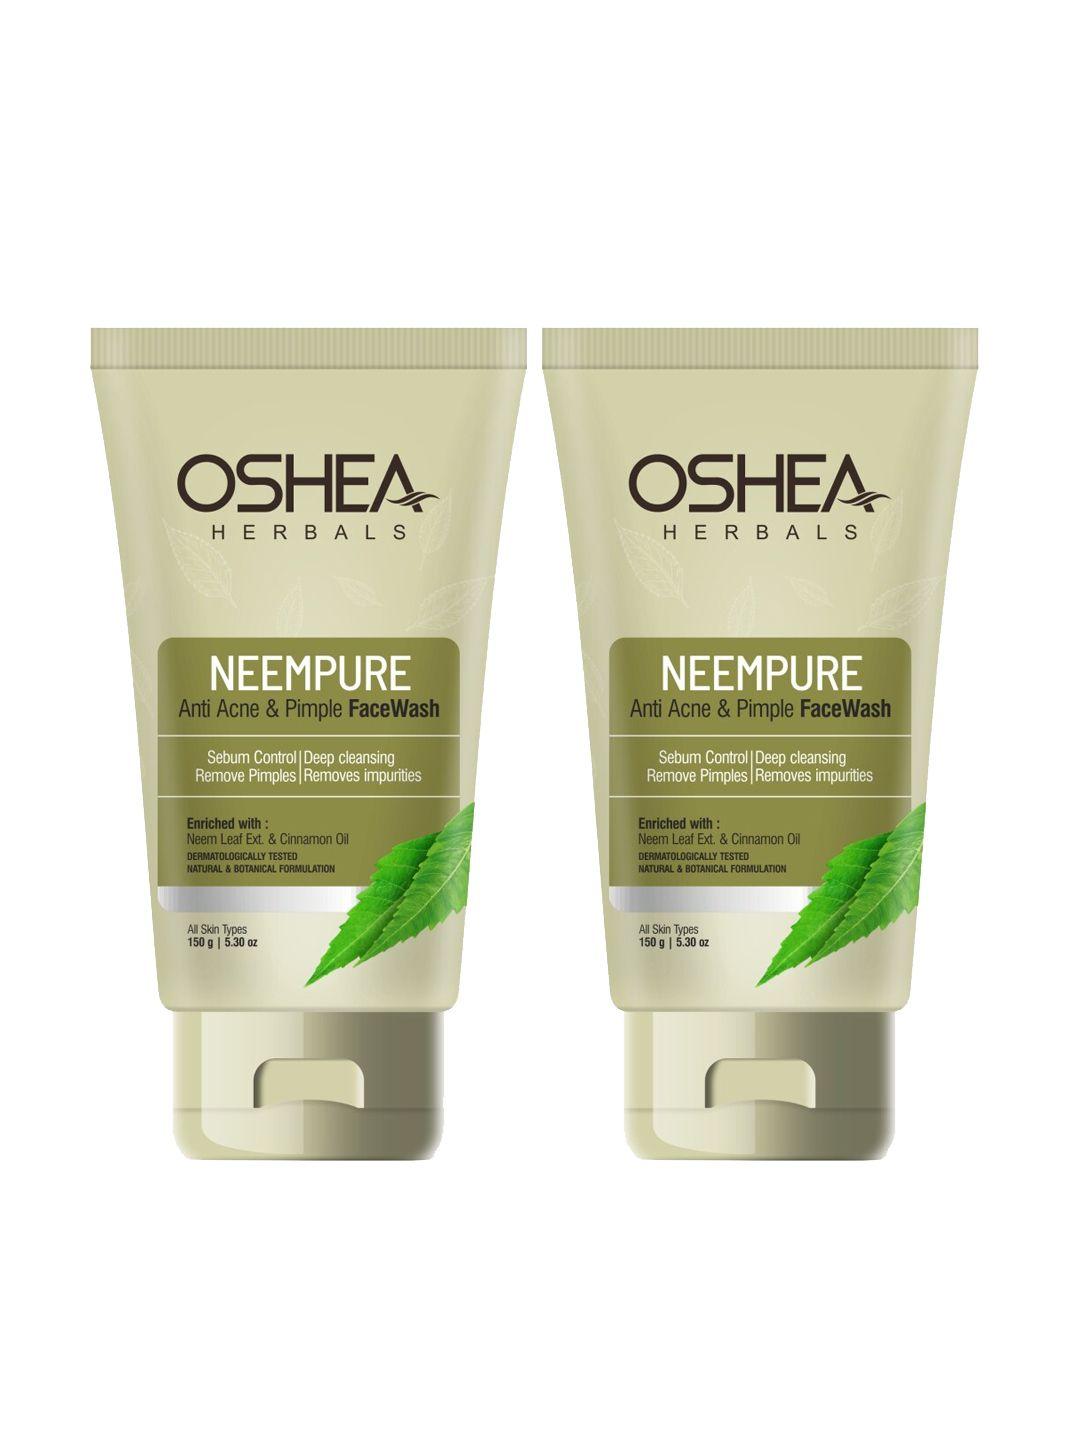 oshea herbals pack of 2 neempure anti acne & pimple face wash